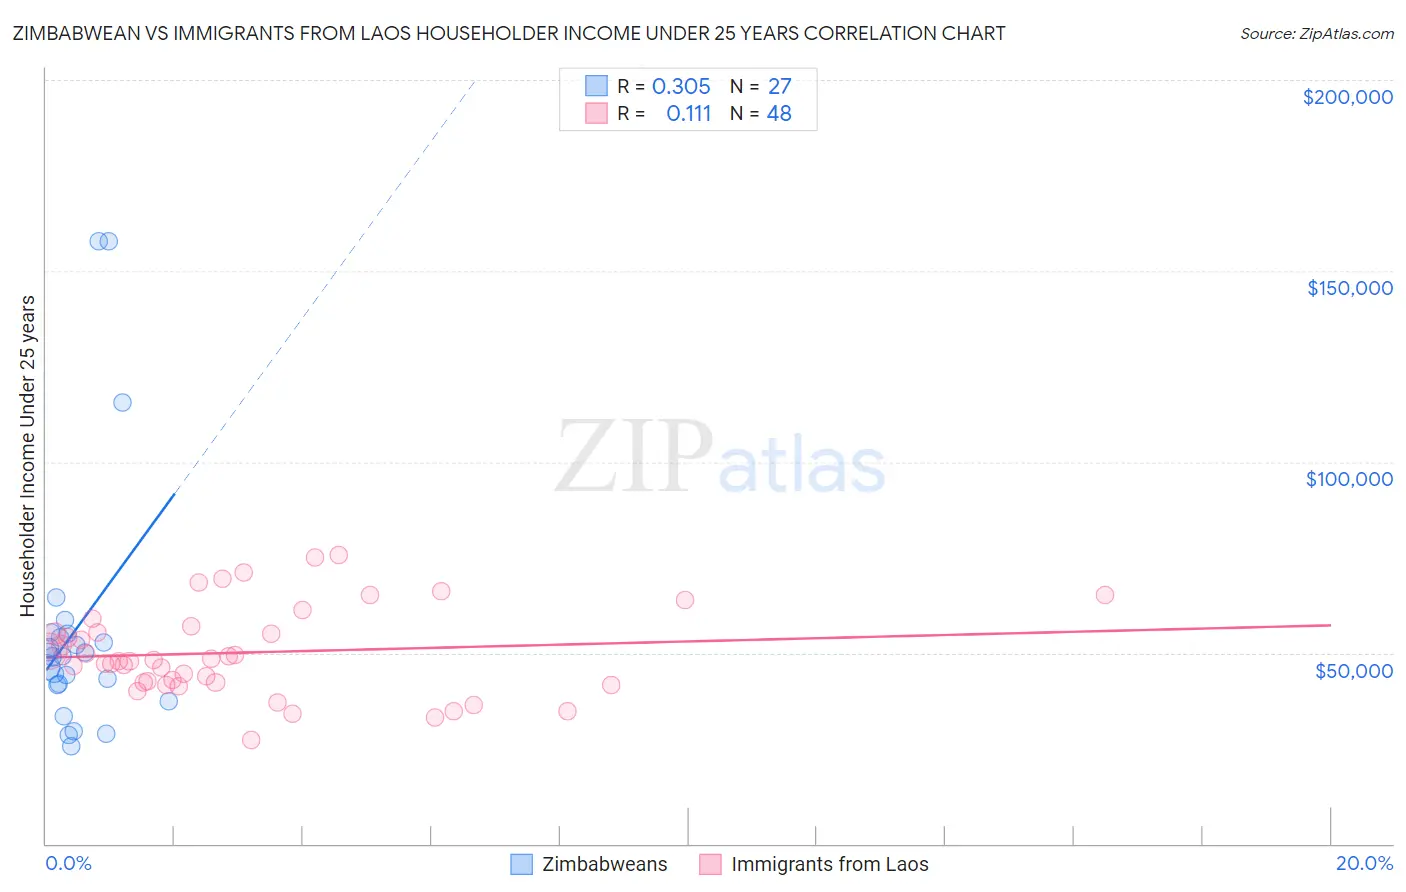 Zimbabwean vs Immigrants from Laos Householder Income Under 25 years